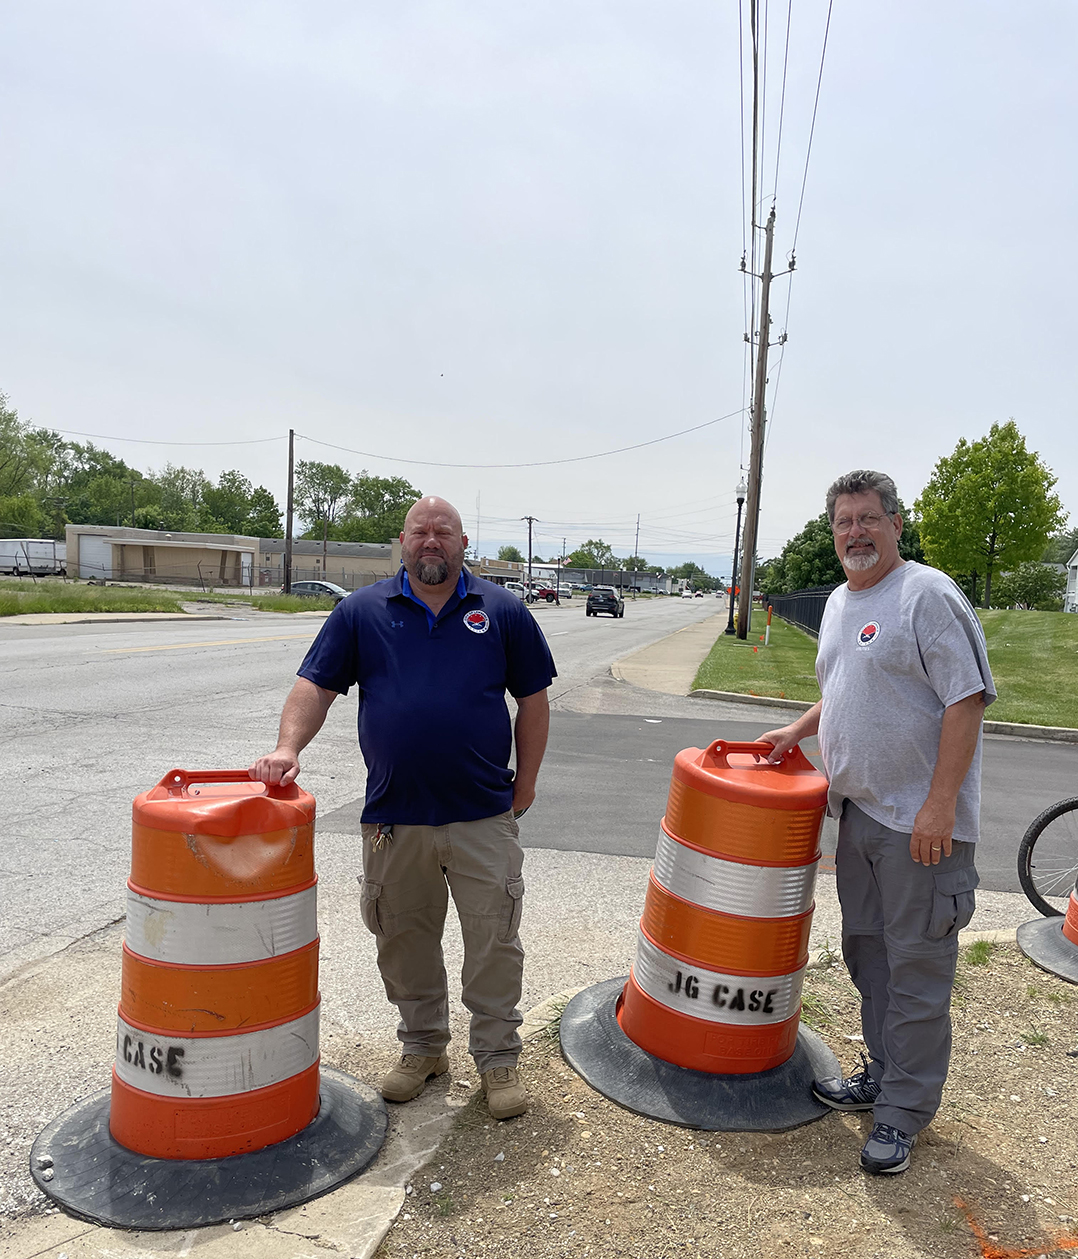 Improving infrastructure: City of Lawrence plans storm sewer improvements with ARPA funds, SWIF grant